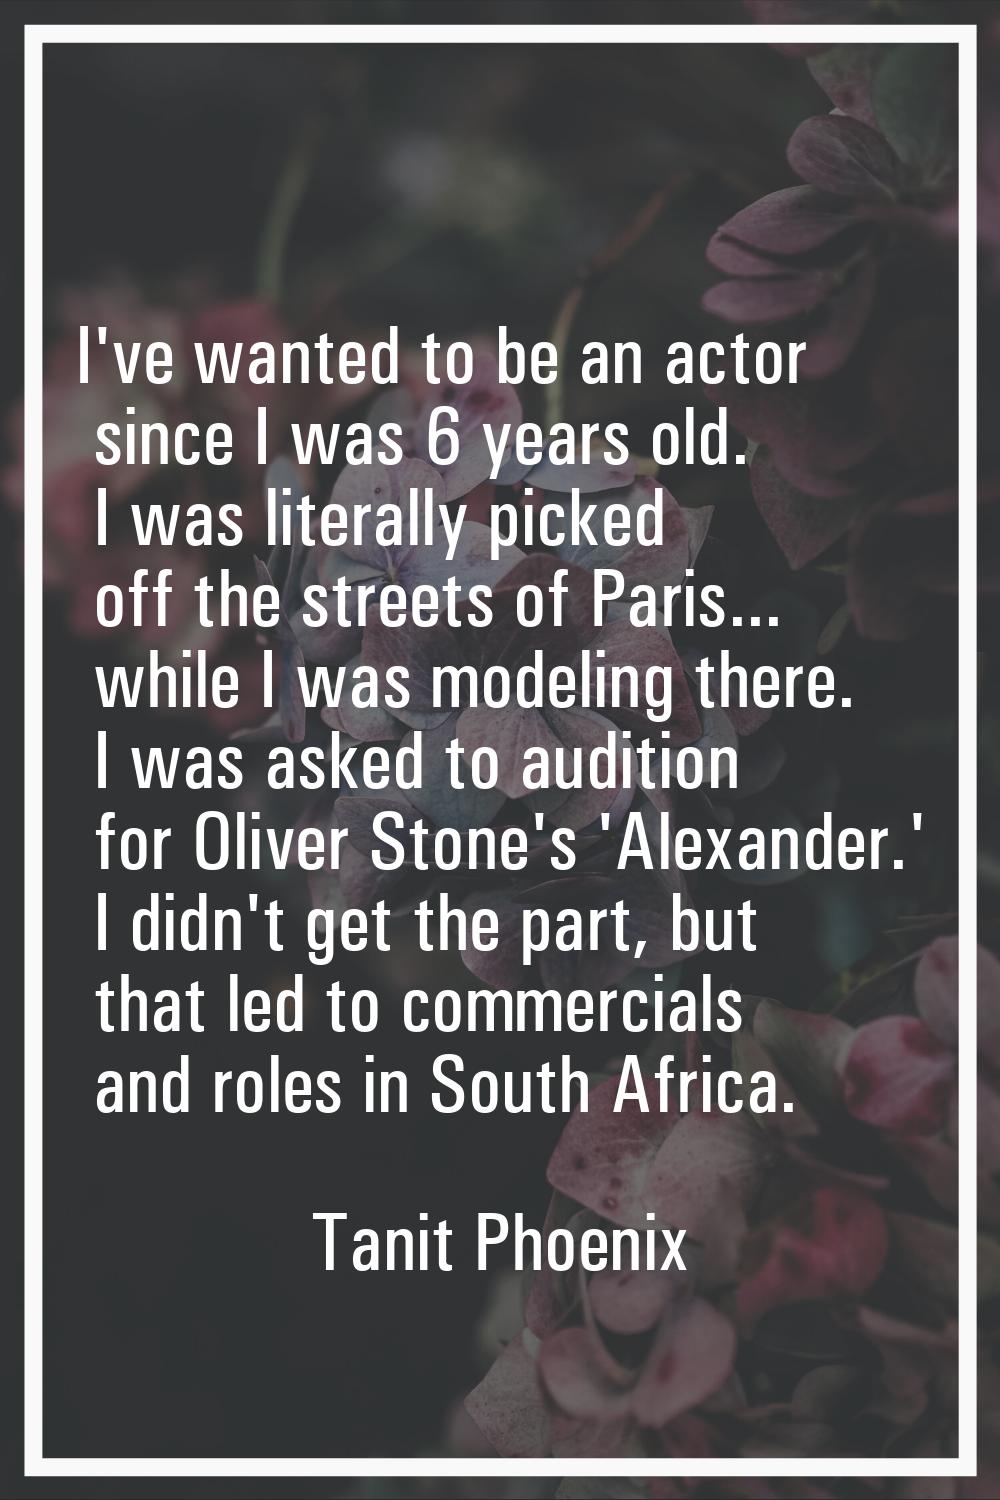 I've wanted to be an actor since I was 6 years old. I was literally picked off the streets of Paris